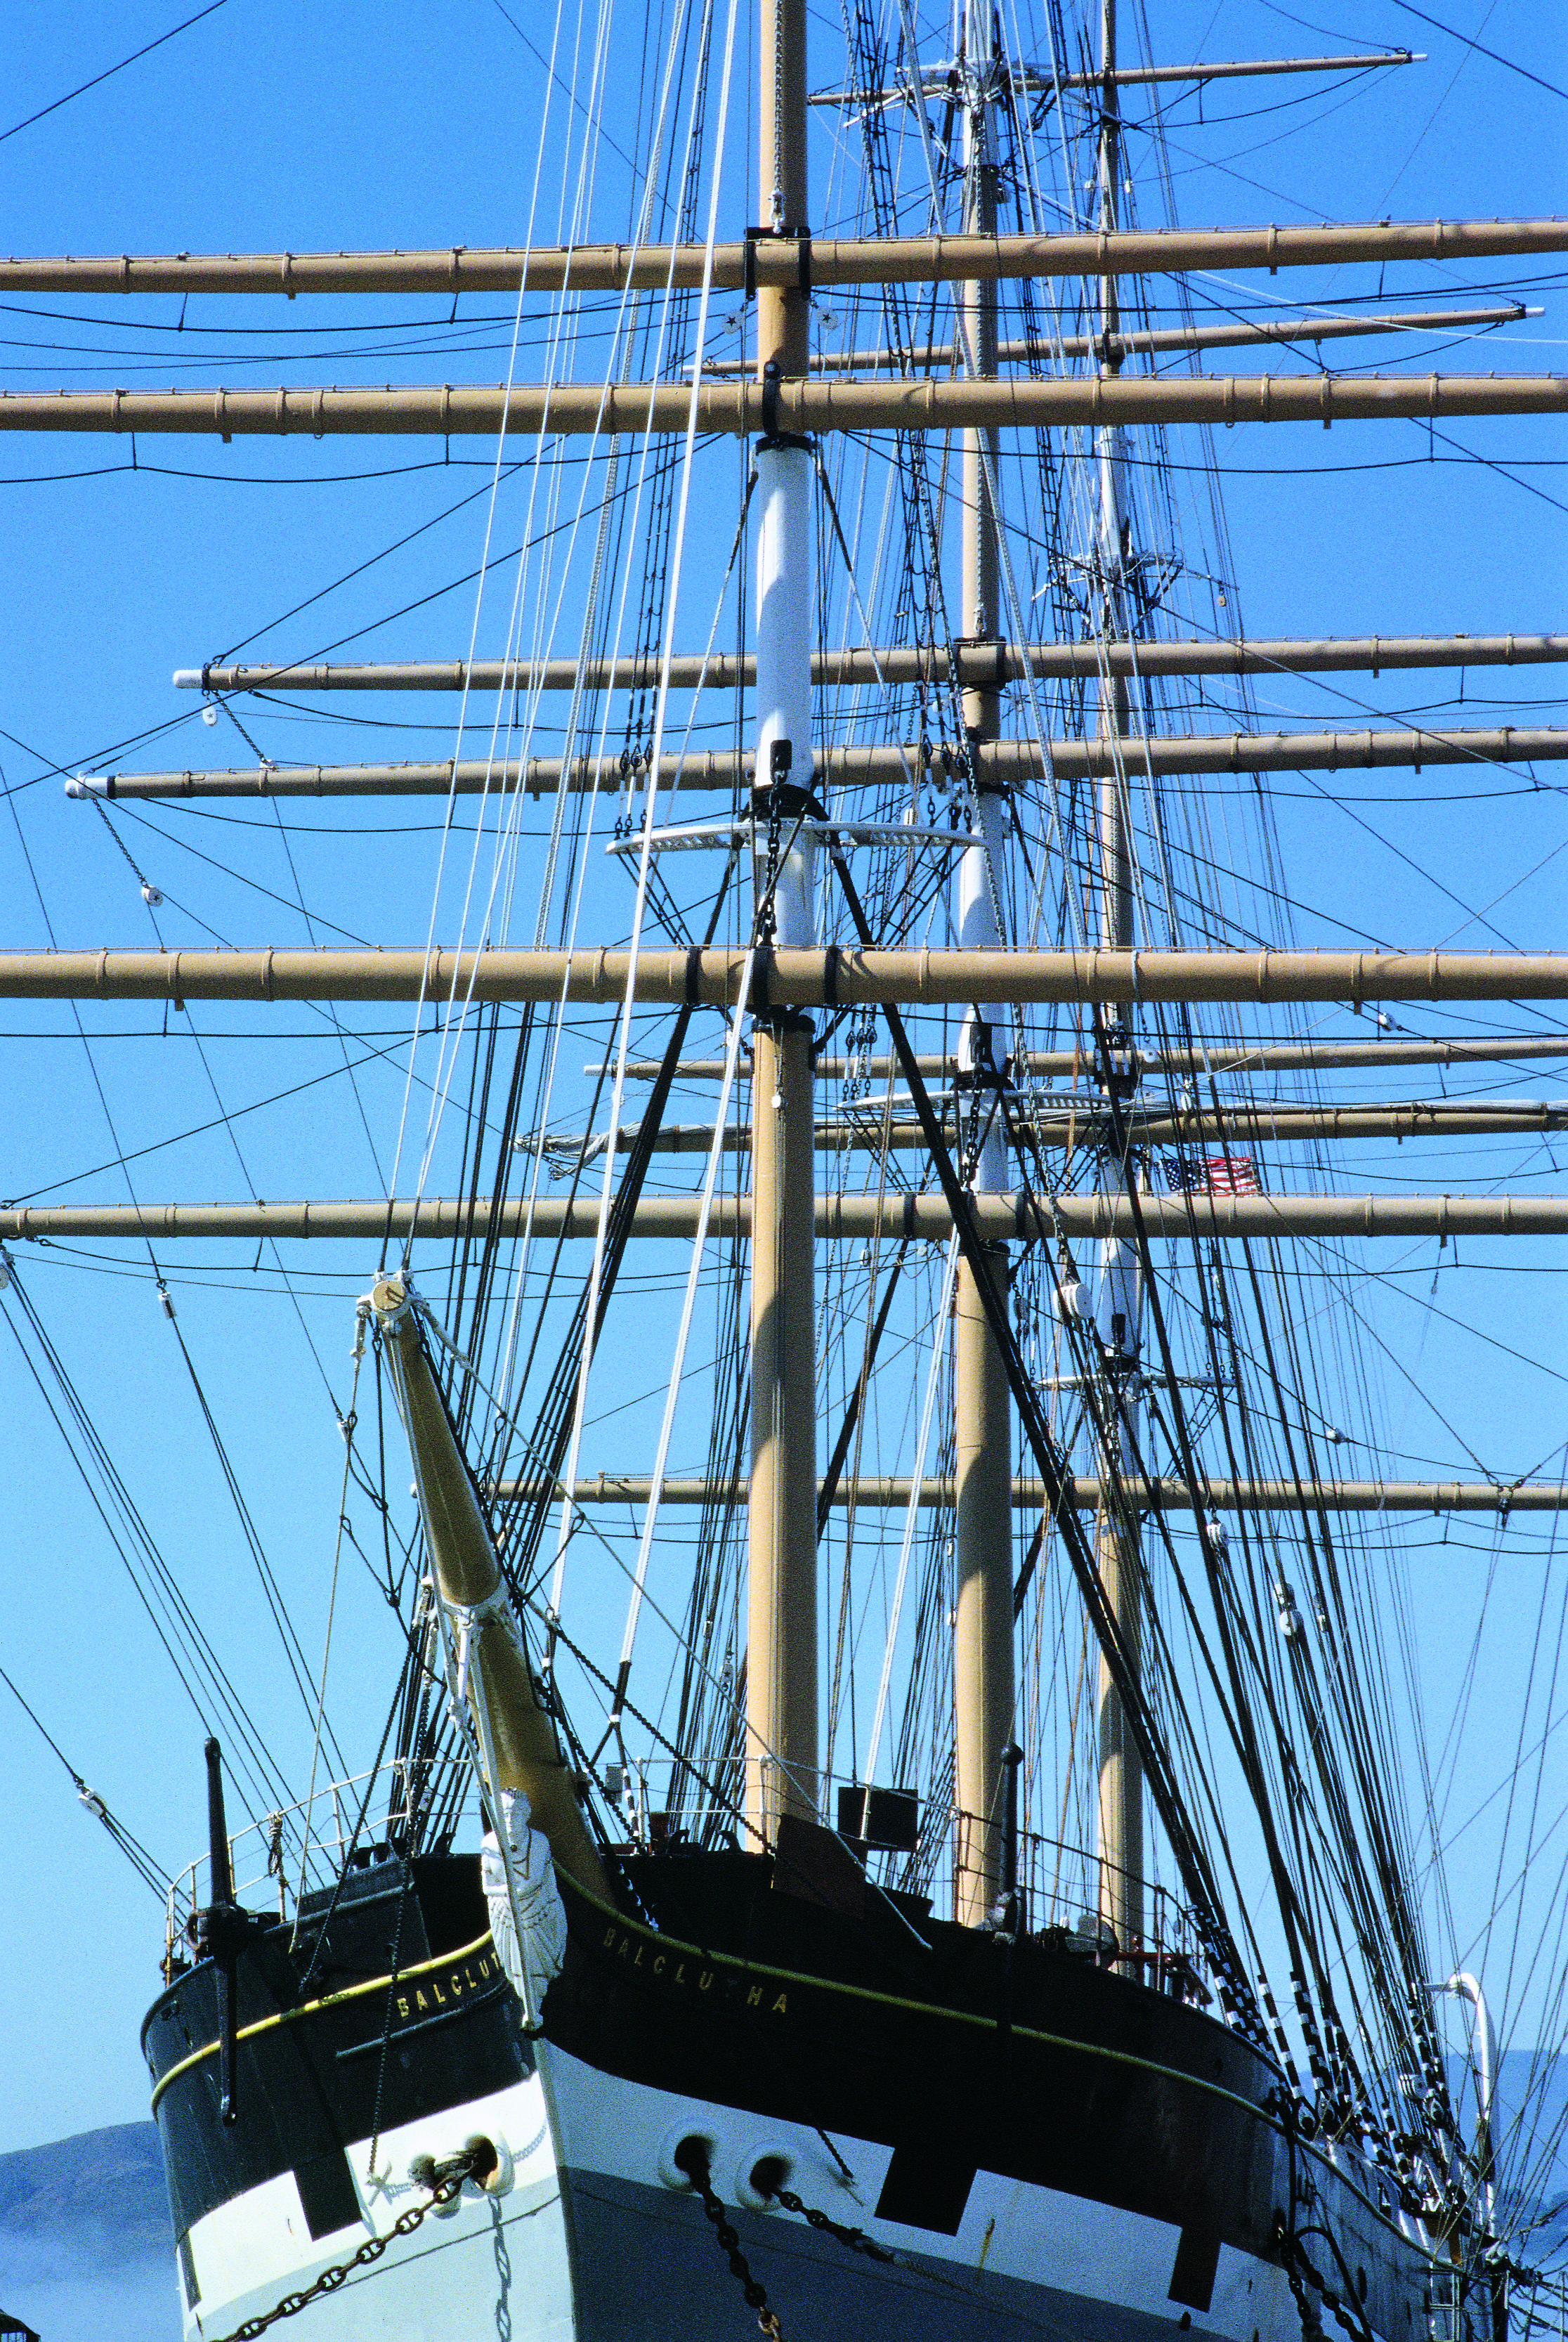 The bow and masts of a 19th century sailing ship.